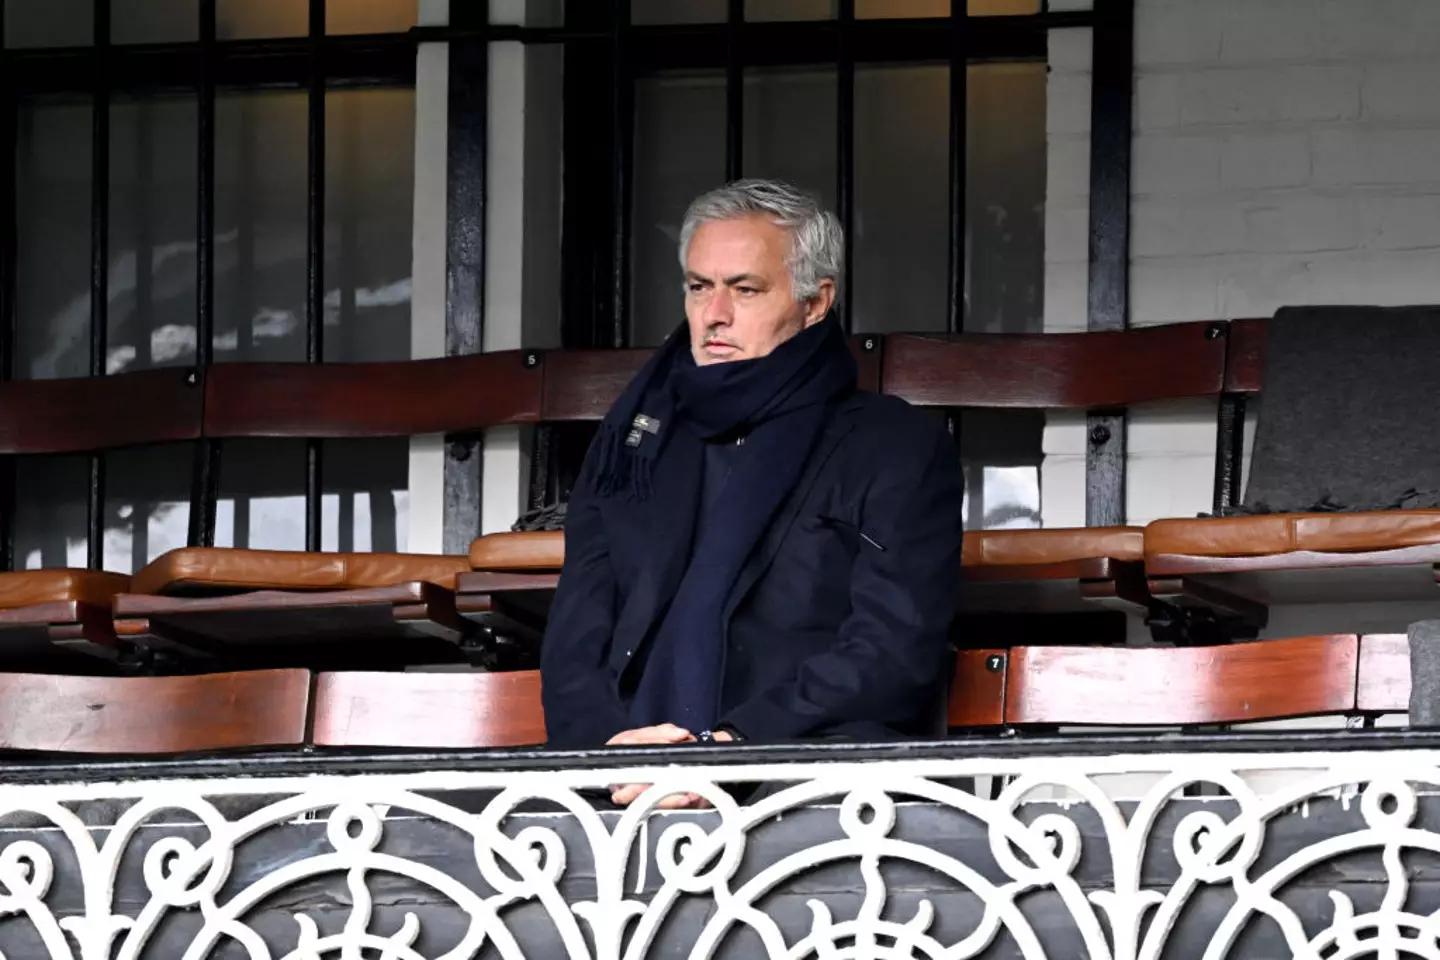 Jose Mourinho has been without a role since being sacked by Roma in January (Image: Getty)